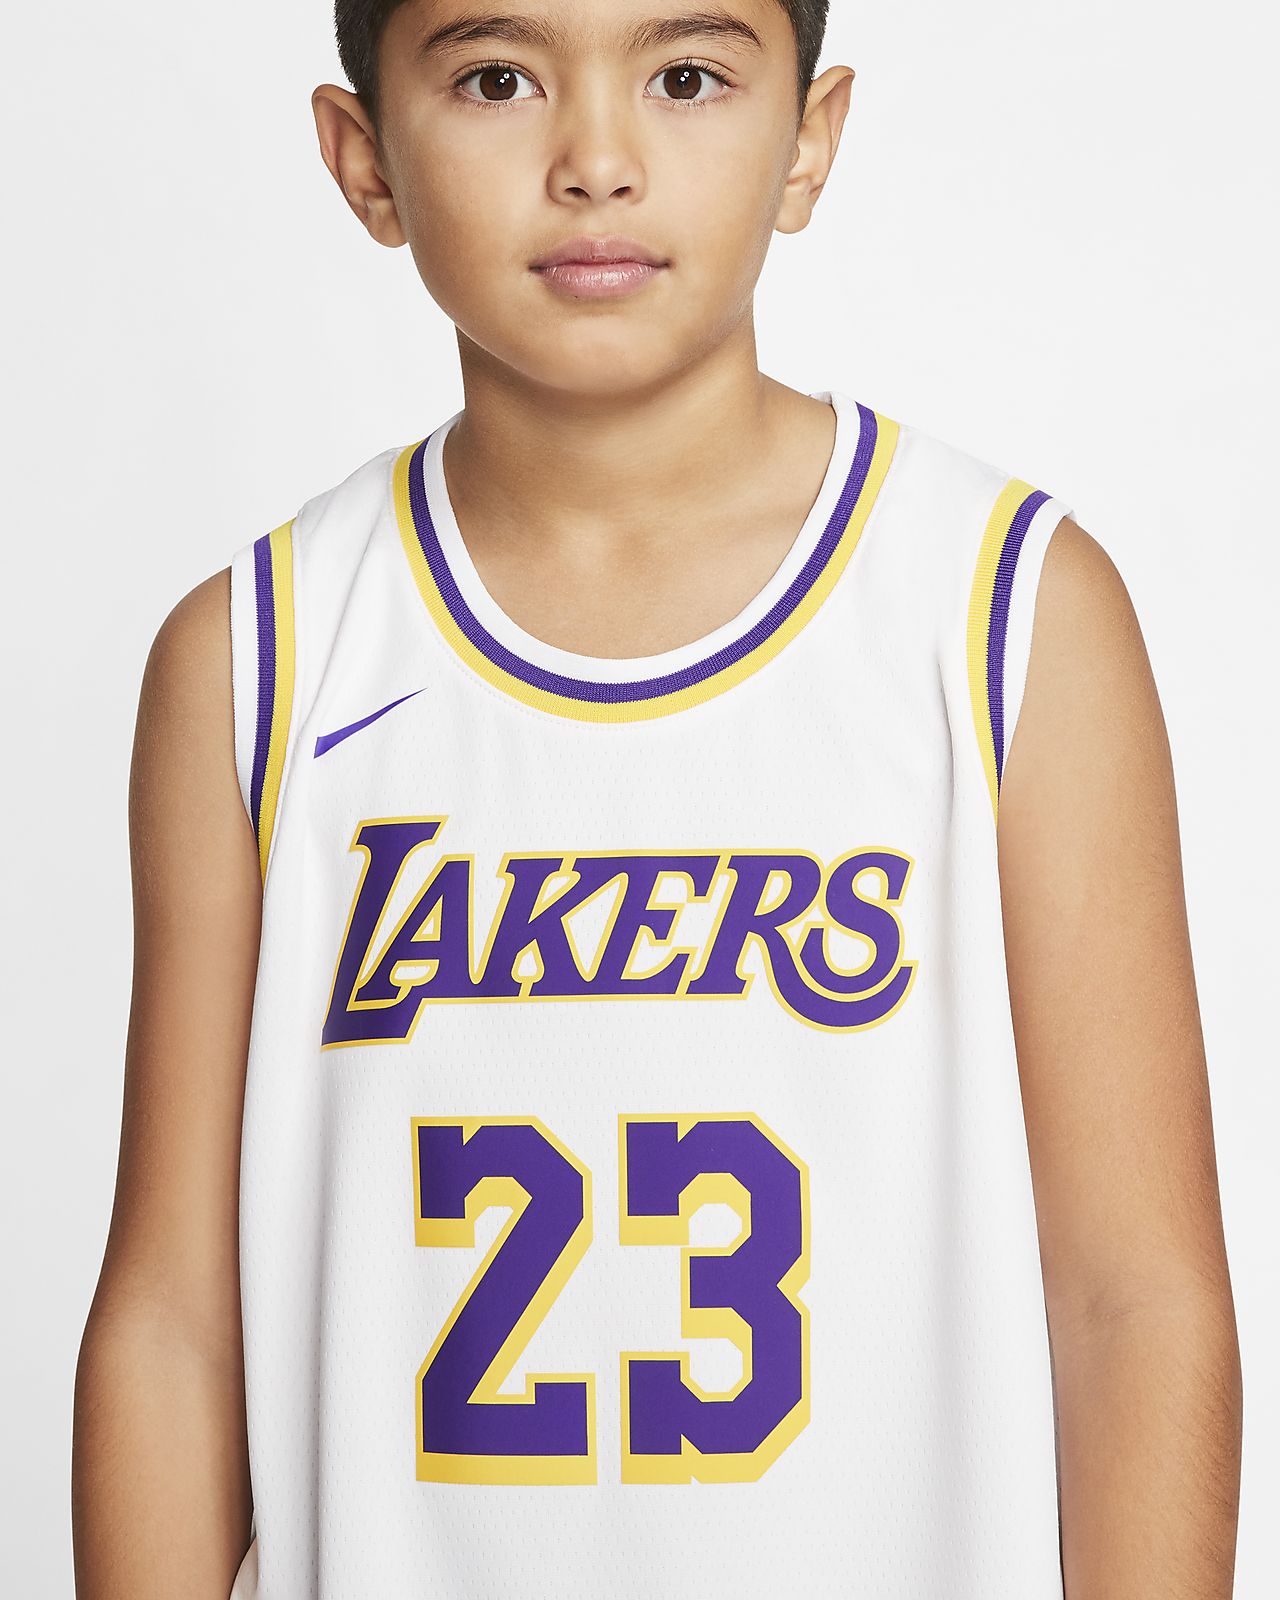 jersey los angeles lakers